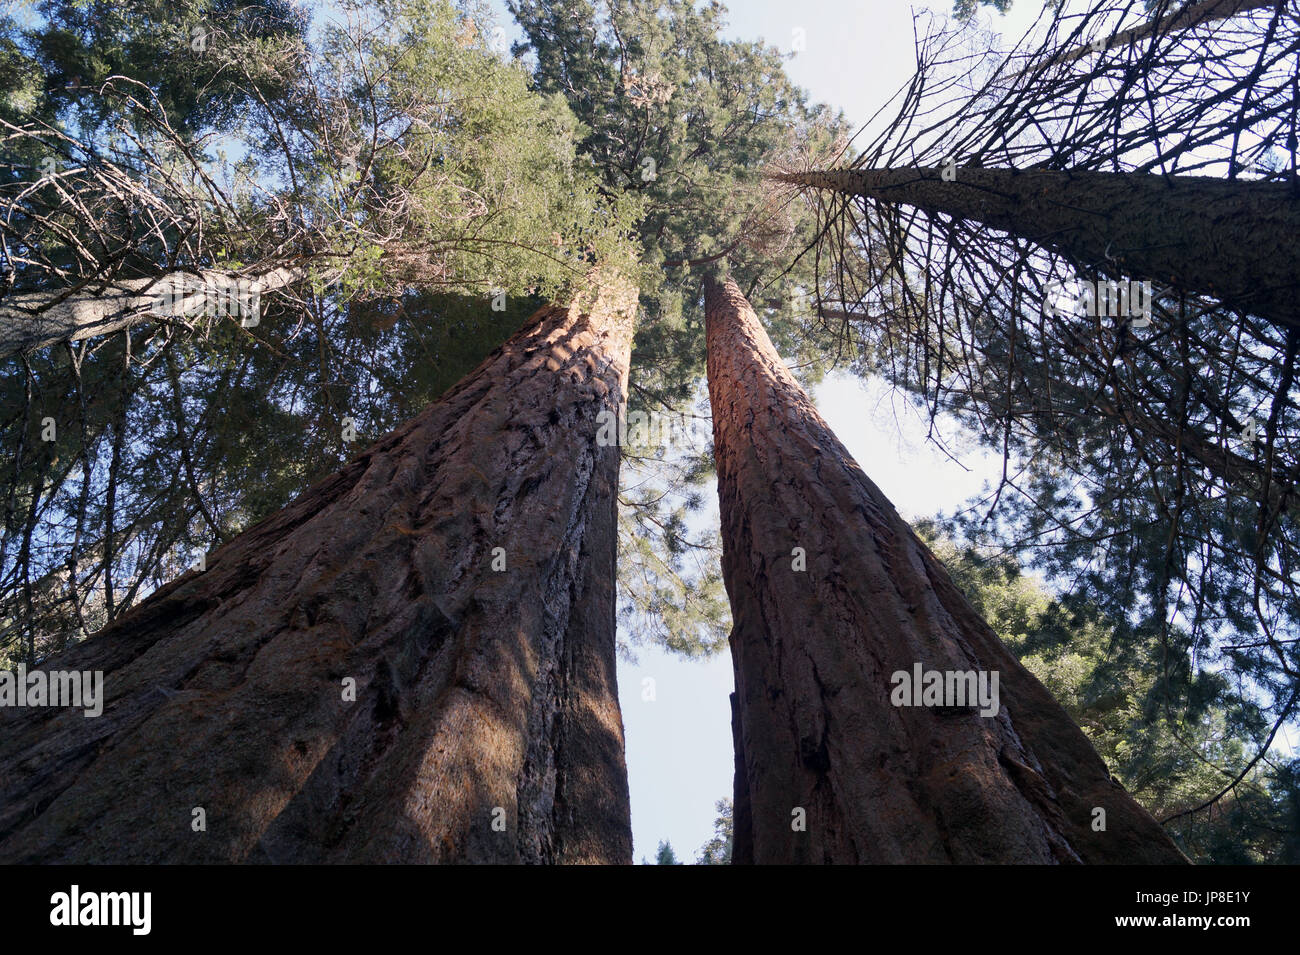 Looking up a redwood tree Stock Photo